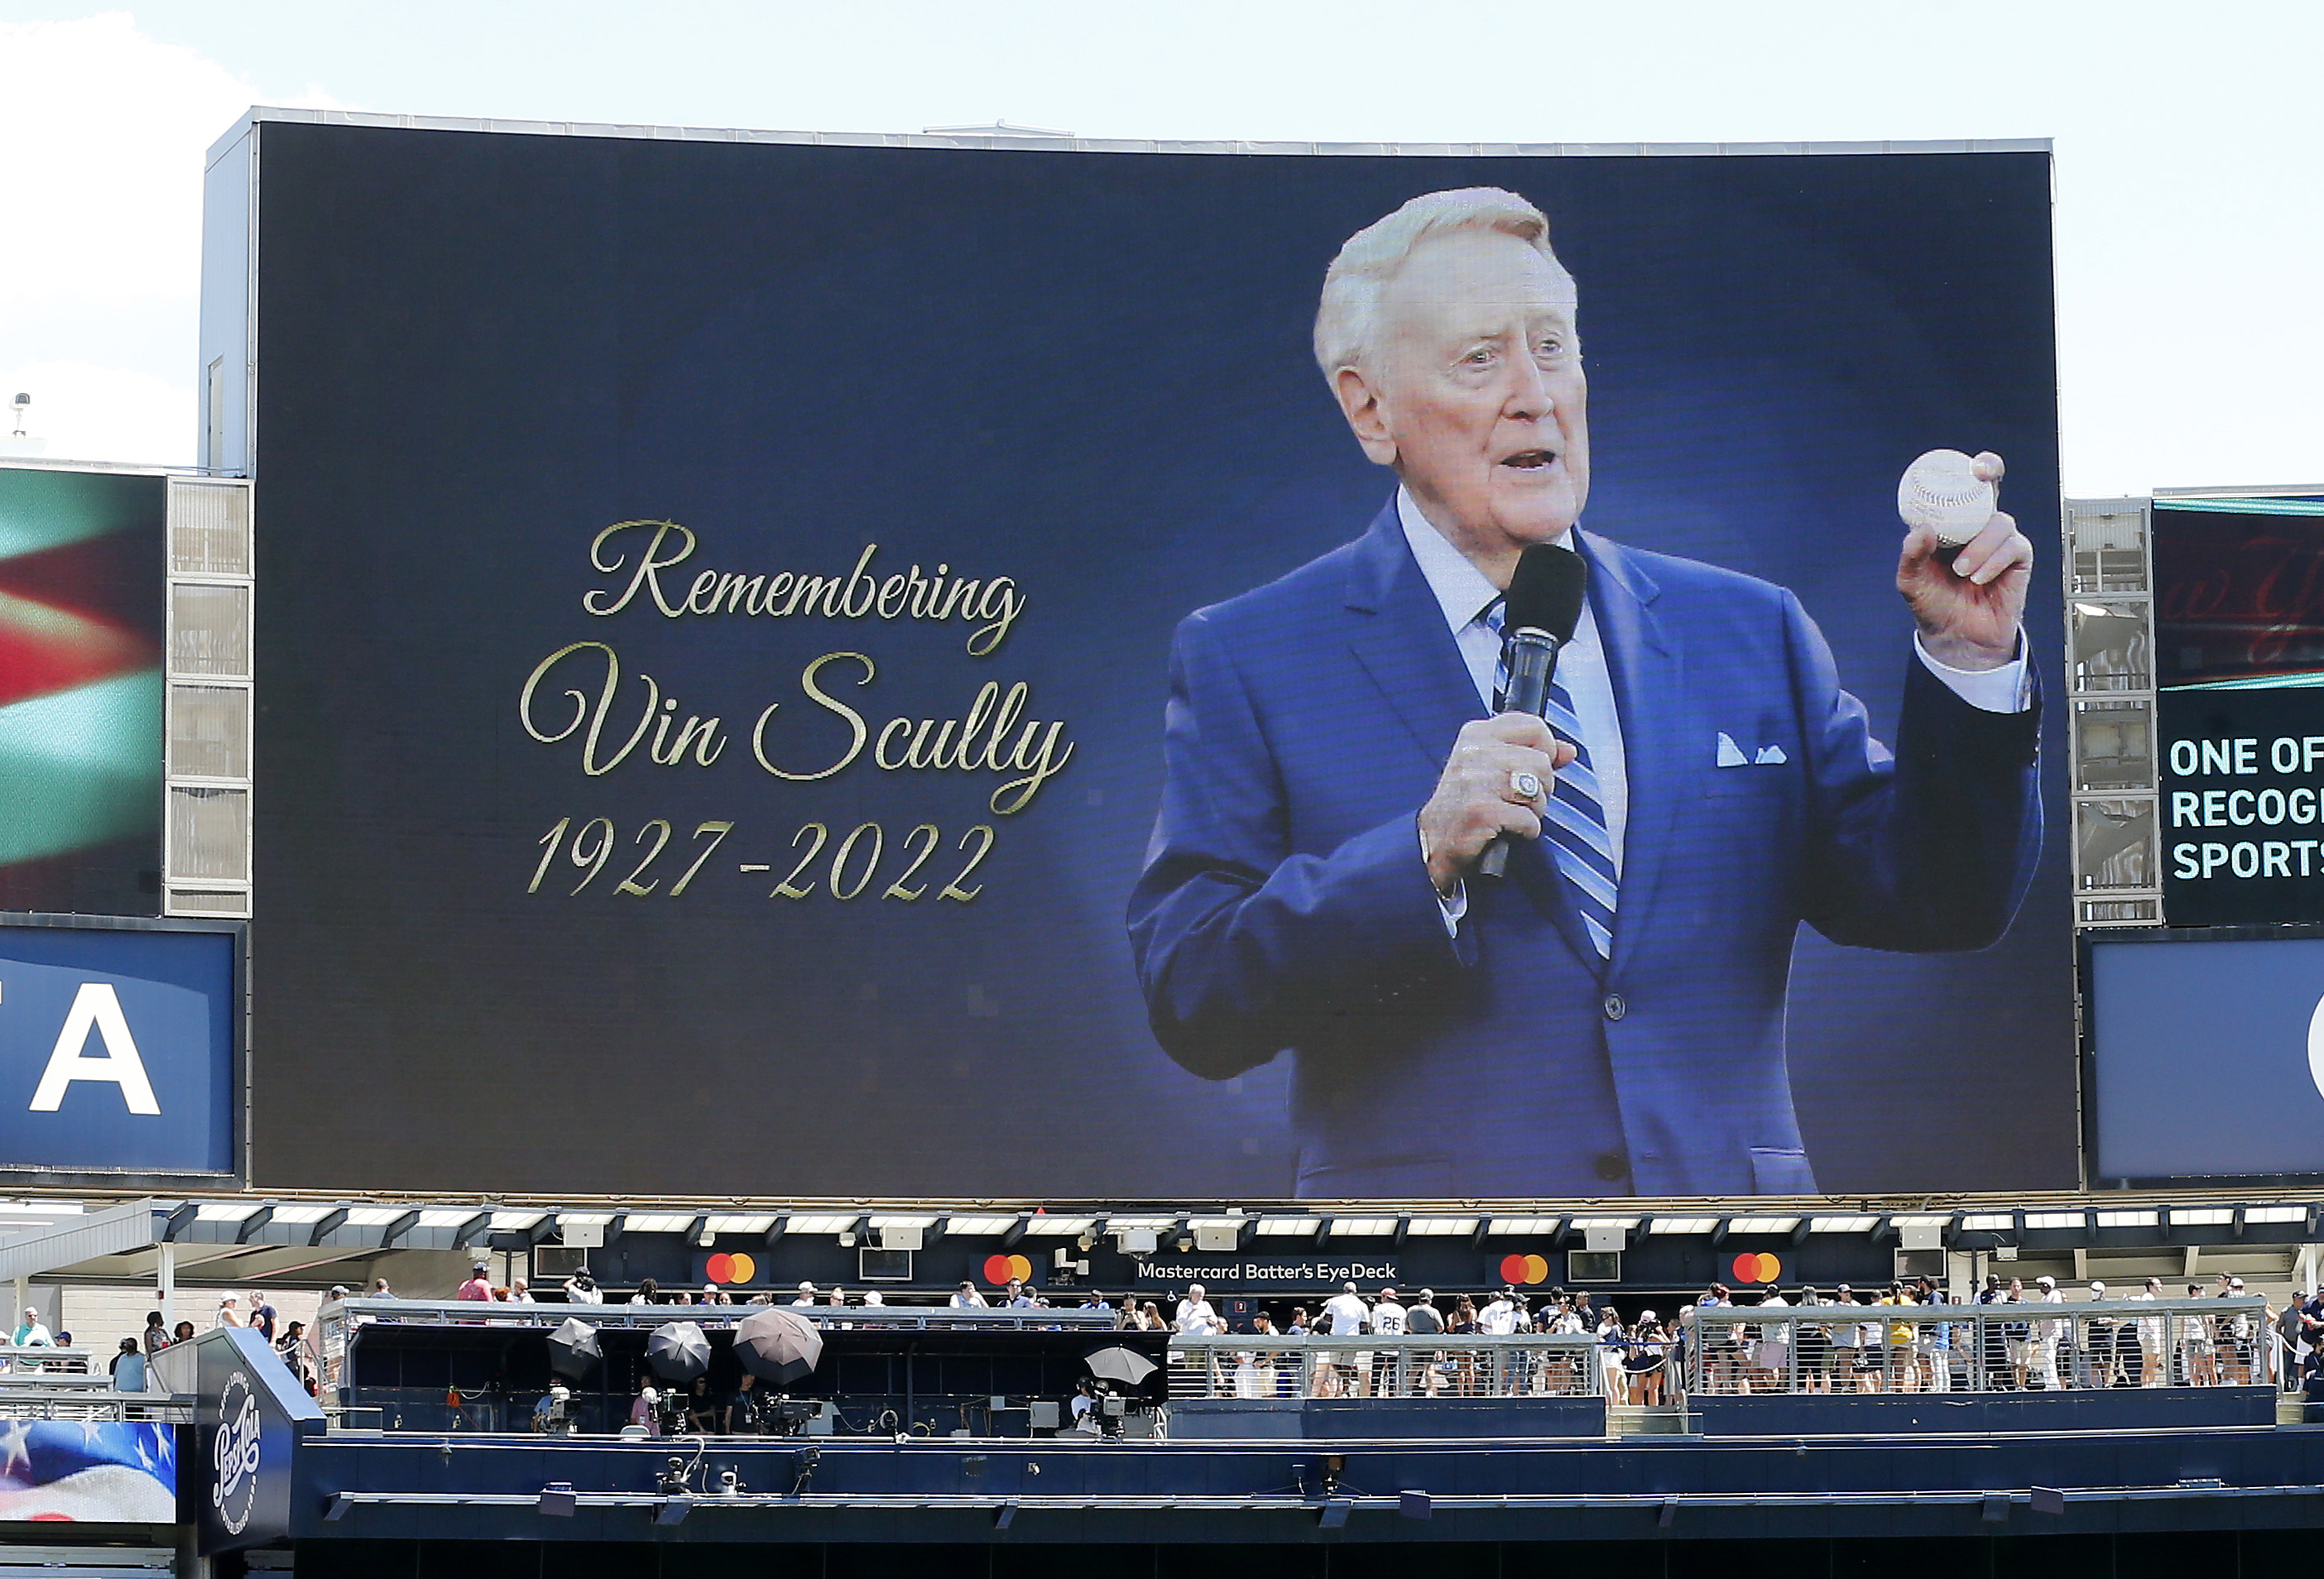 Vin Scully Was the GOAT of Baseball Broadcasters but Still Gives Red Sox Fans Nightmares